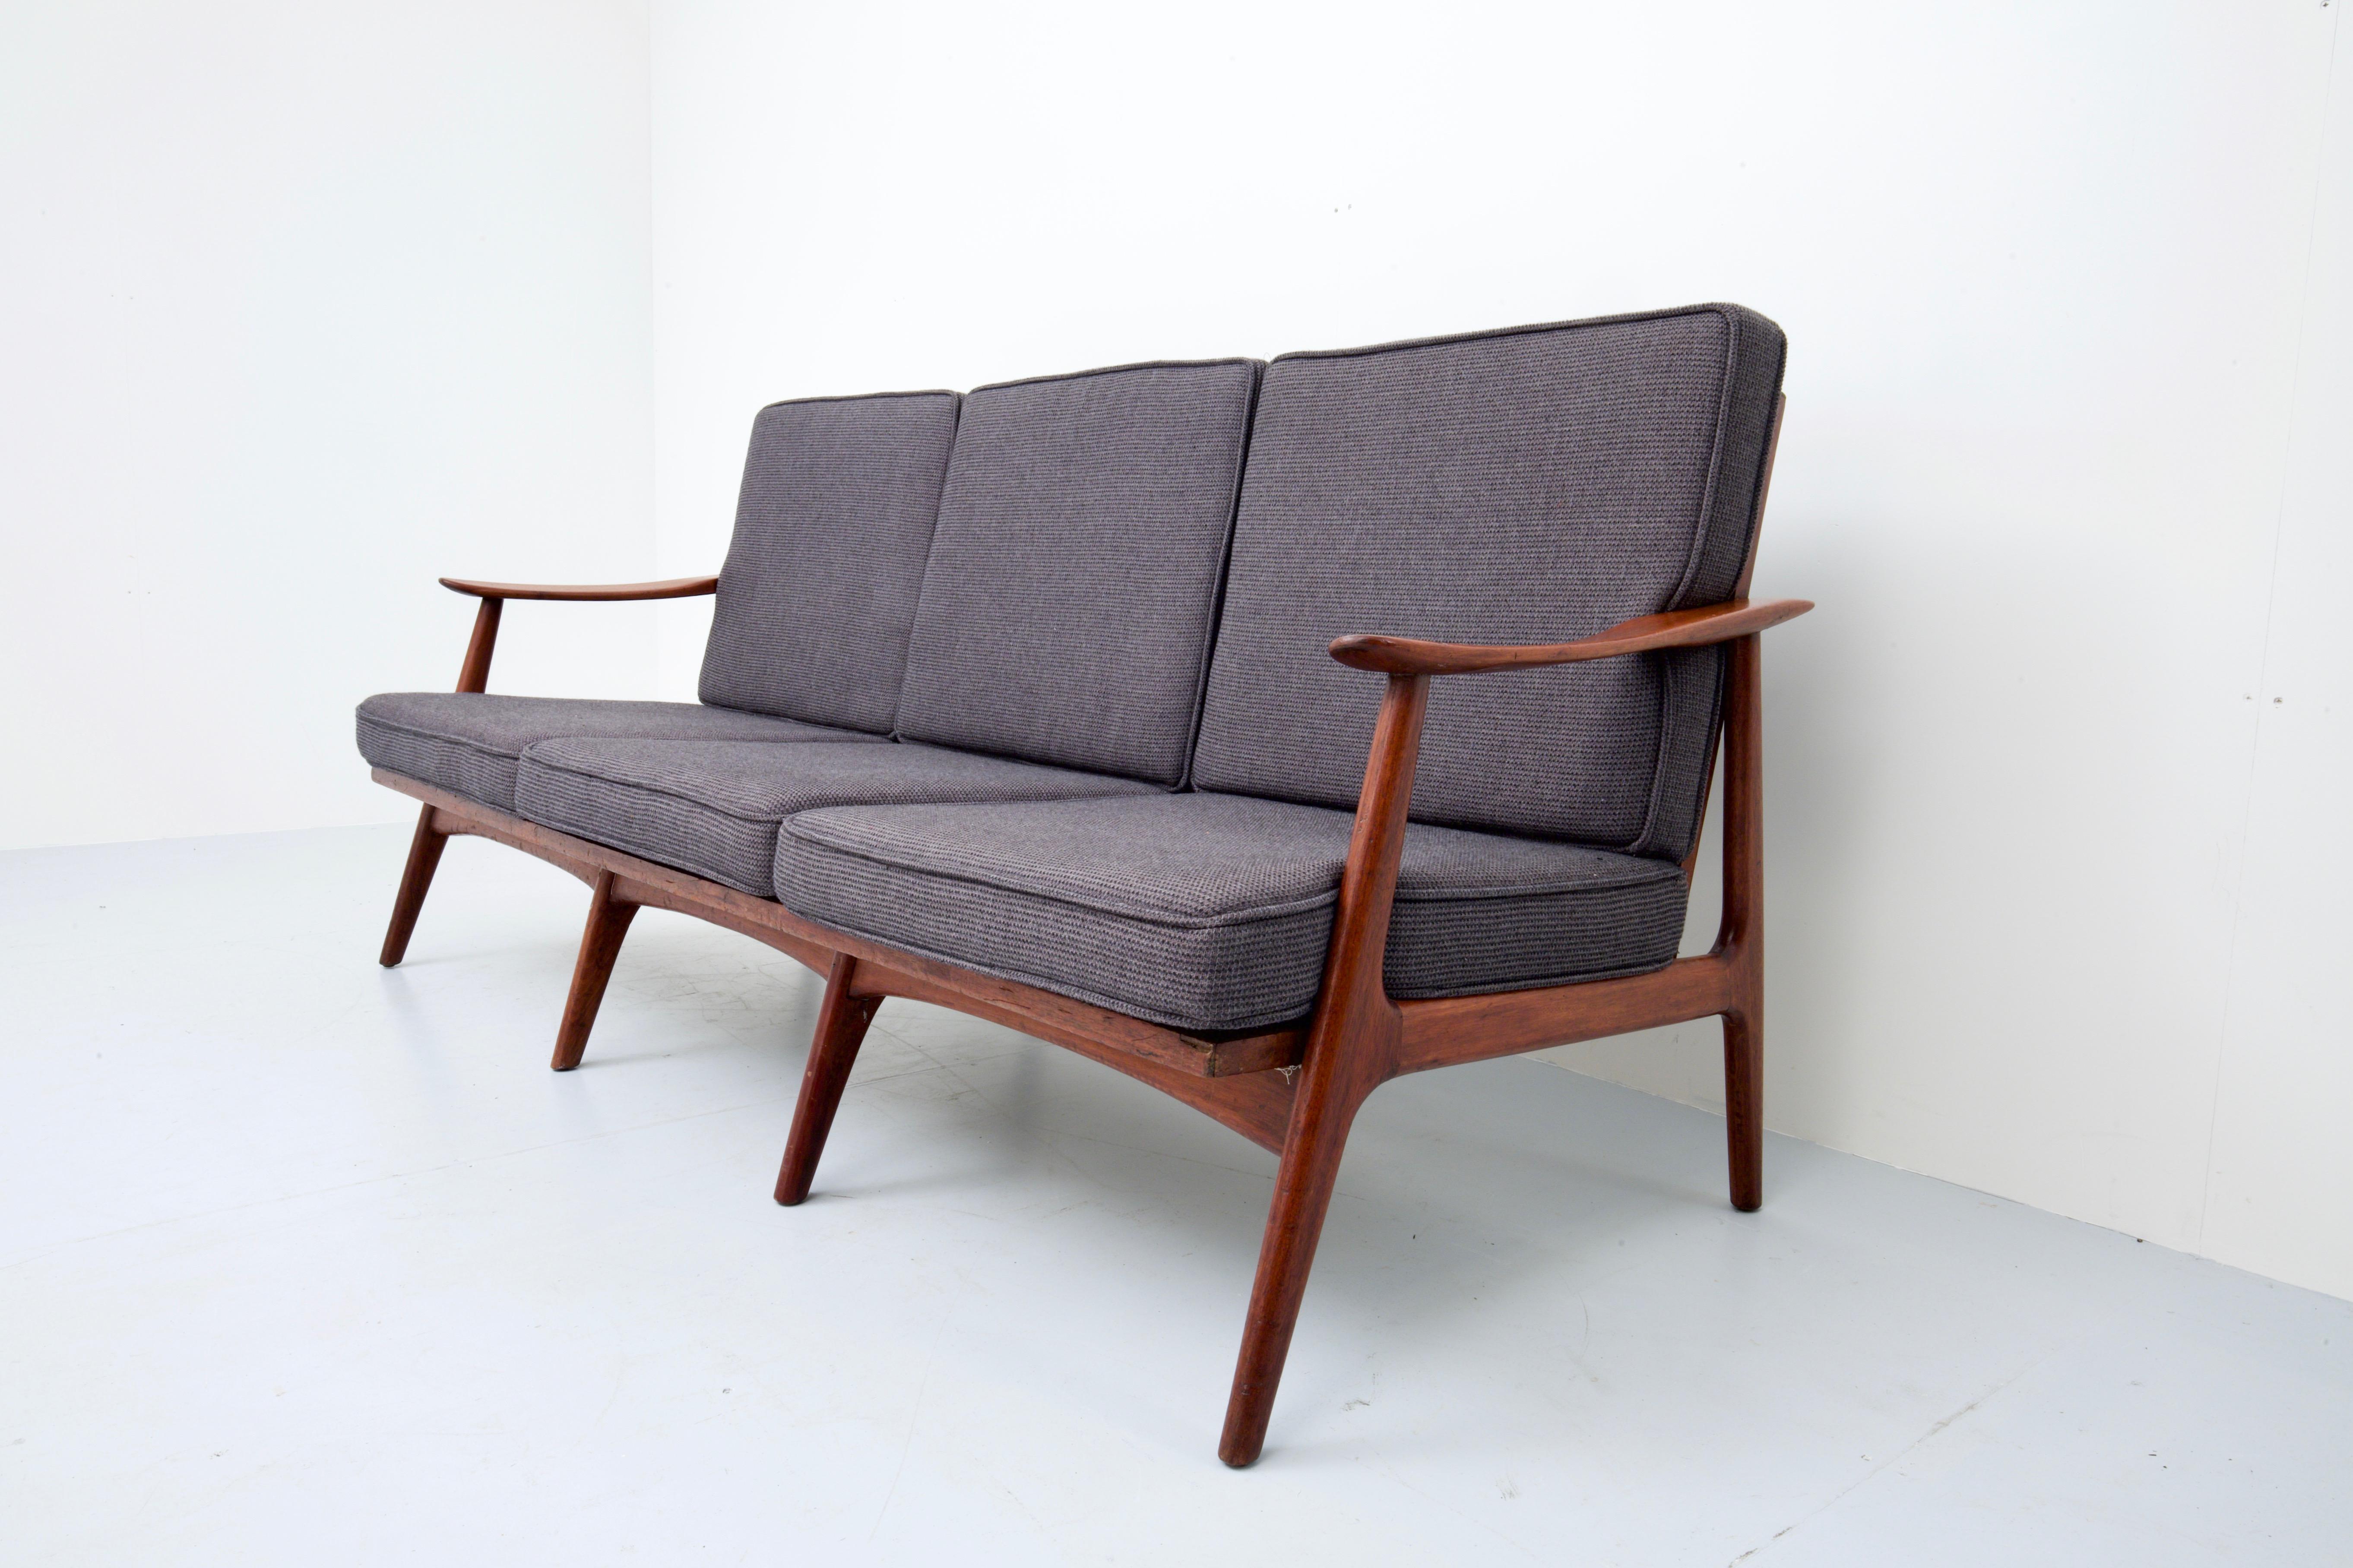 Mid-Century Modern Italian Three-Seat Sofa with Armrests in Patinated Oak and Fabric, 1960s For Sale